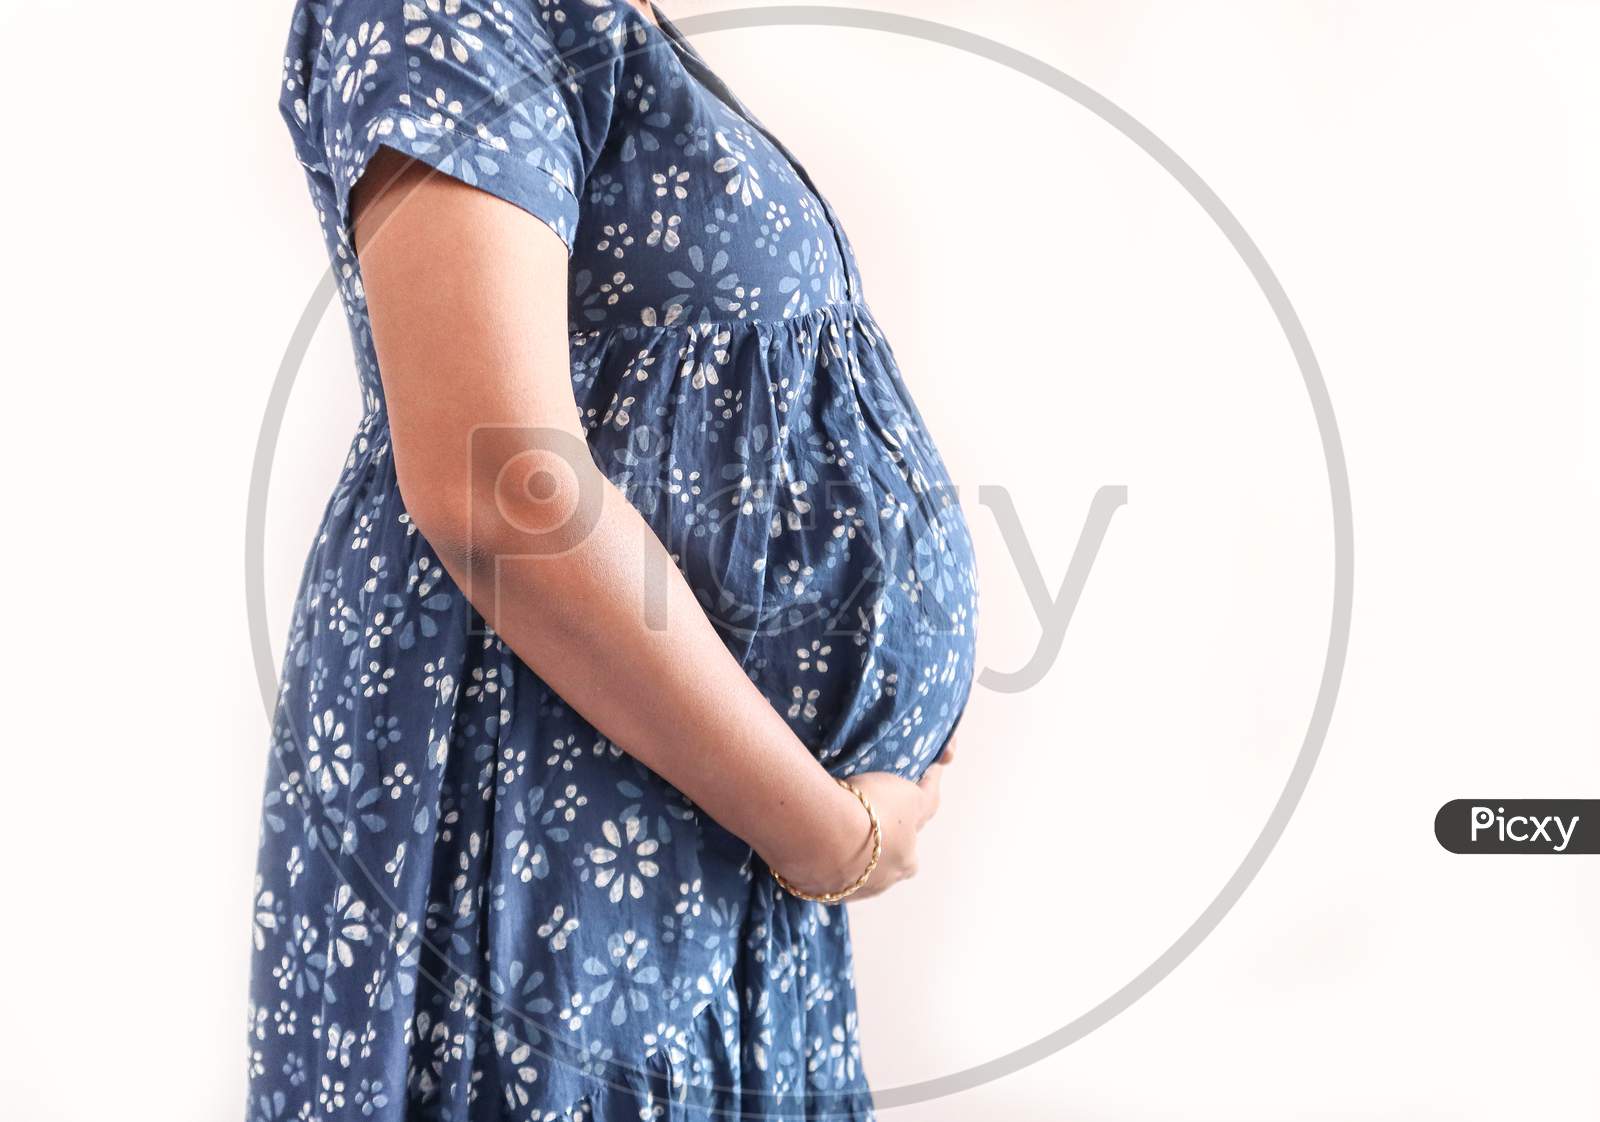 A Pregnant Lady With Blue Dress And Hands On Belly